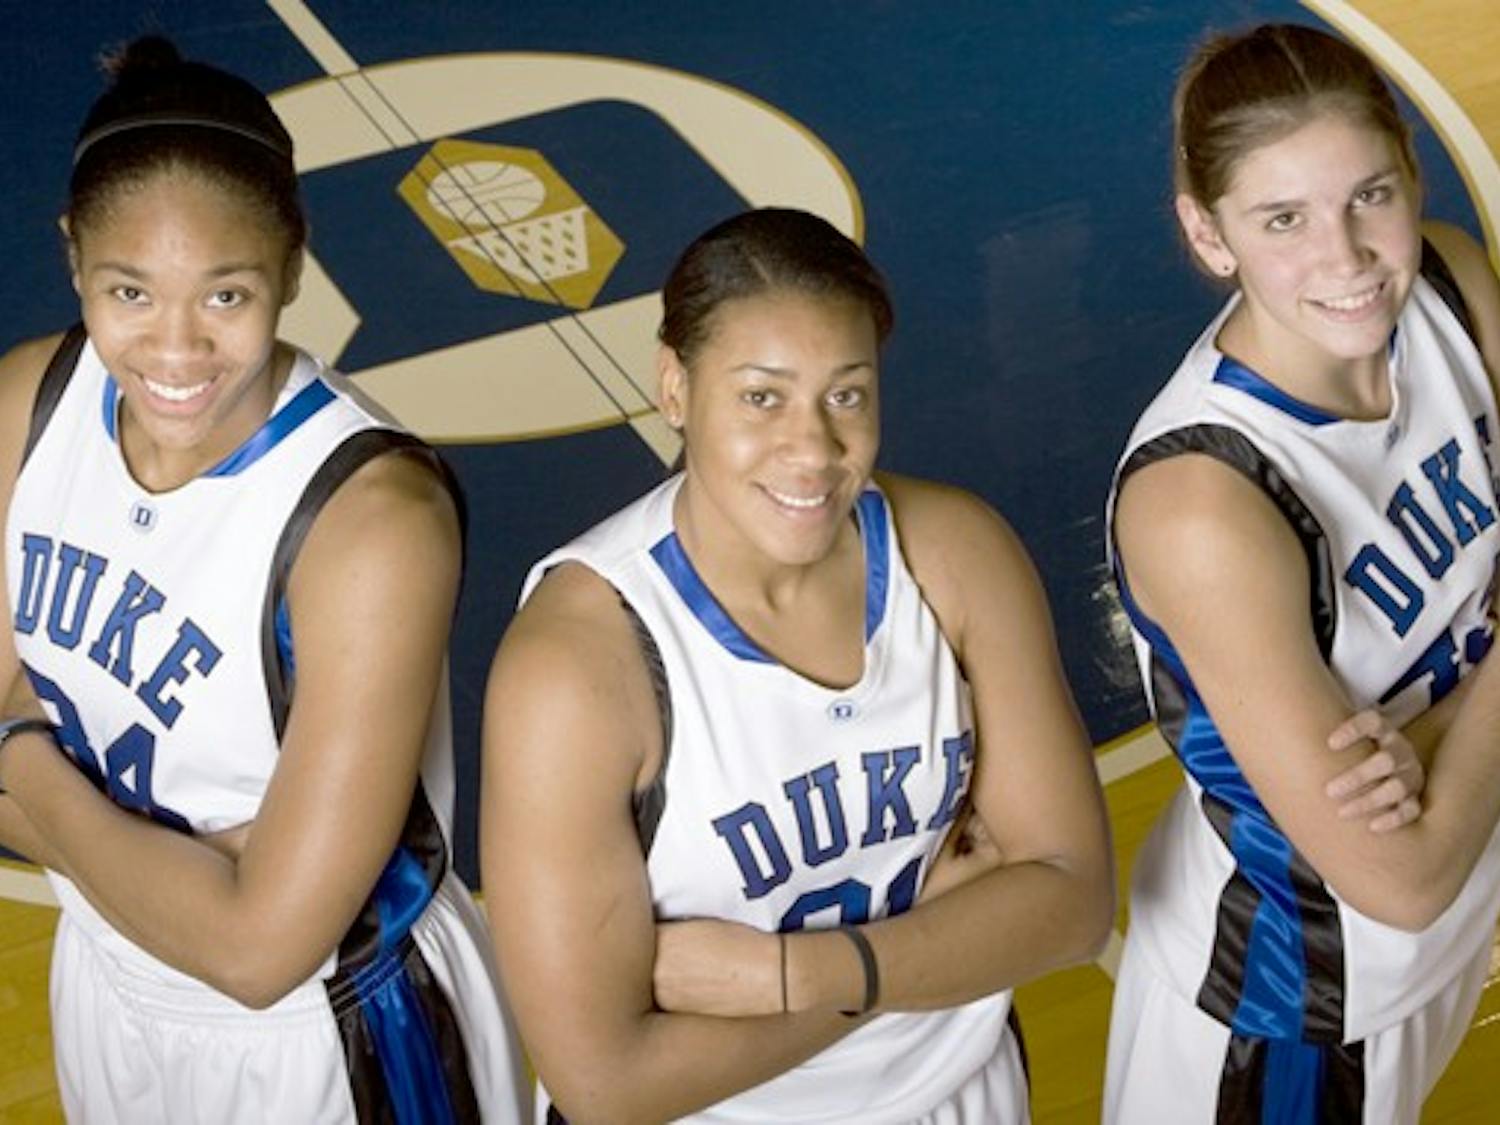 Krystal Thomas, Joy Cheek and Allison Vernerey (left to right) are charged with anchoring the Duke defense in place of departed twosome Chante Black and Carrem Gay this season.